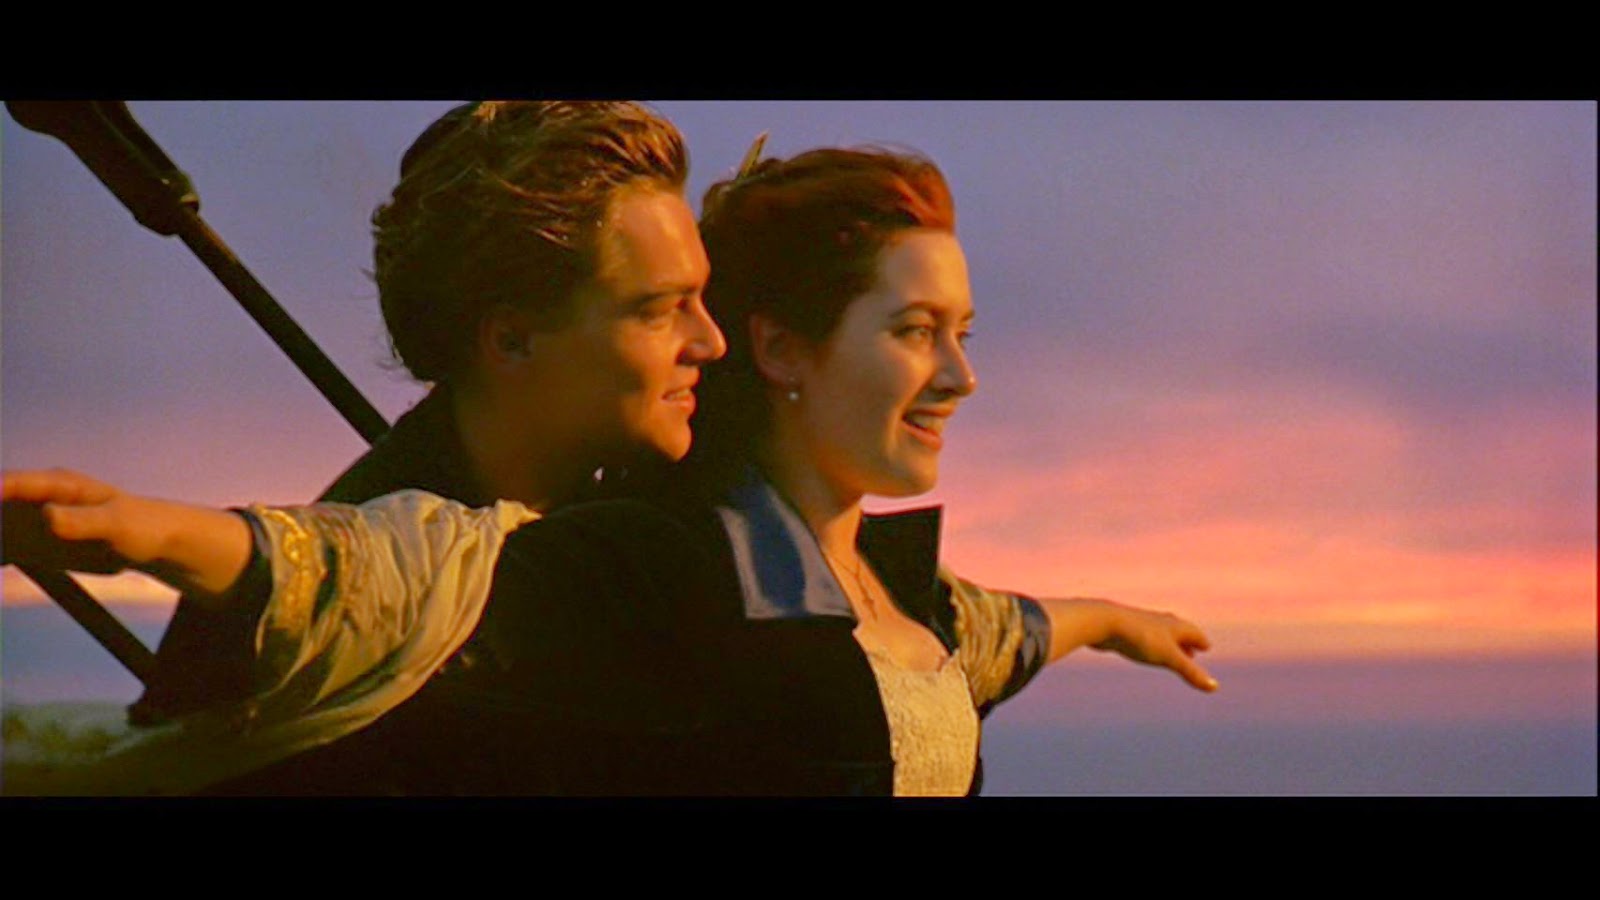 Titanic': Was Jack Dawson an Actual Passenger on the Real Titanic?